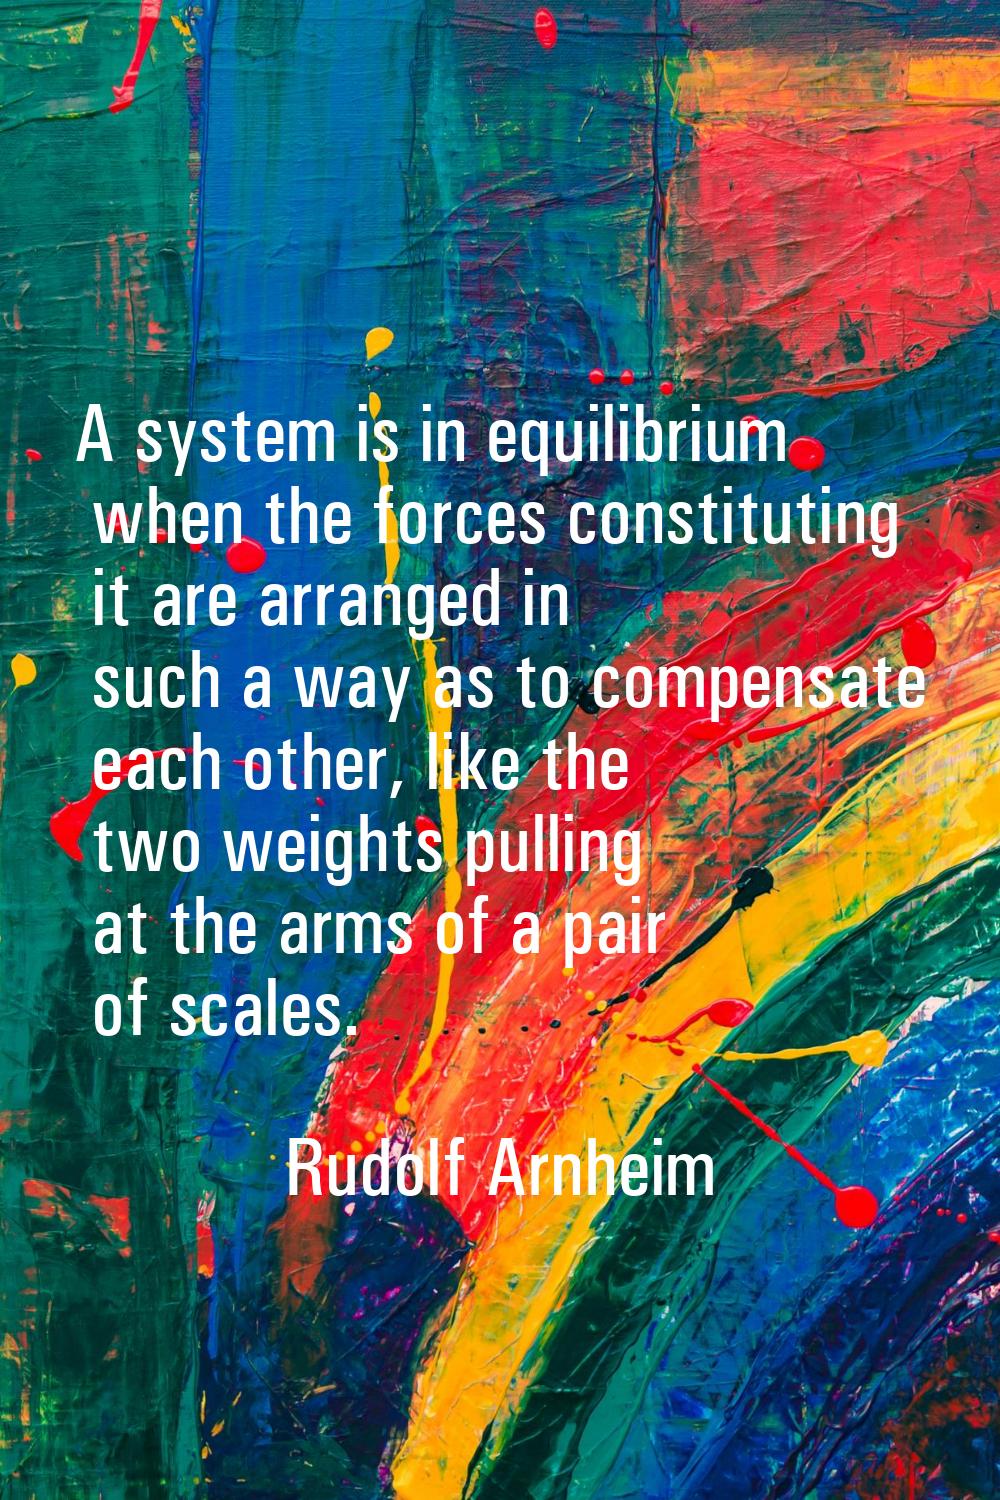 A system is in equilibrium when the forces constituting it are arranged in such a way as to compens